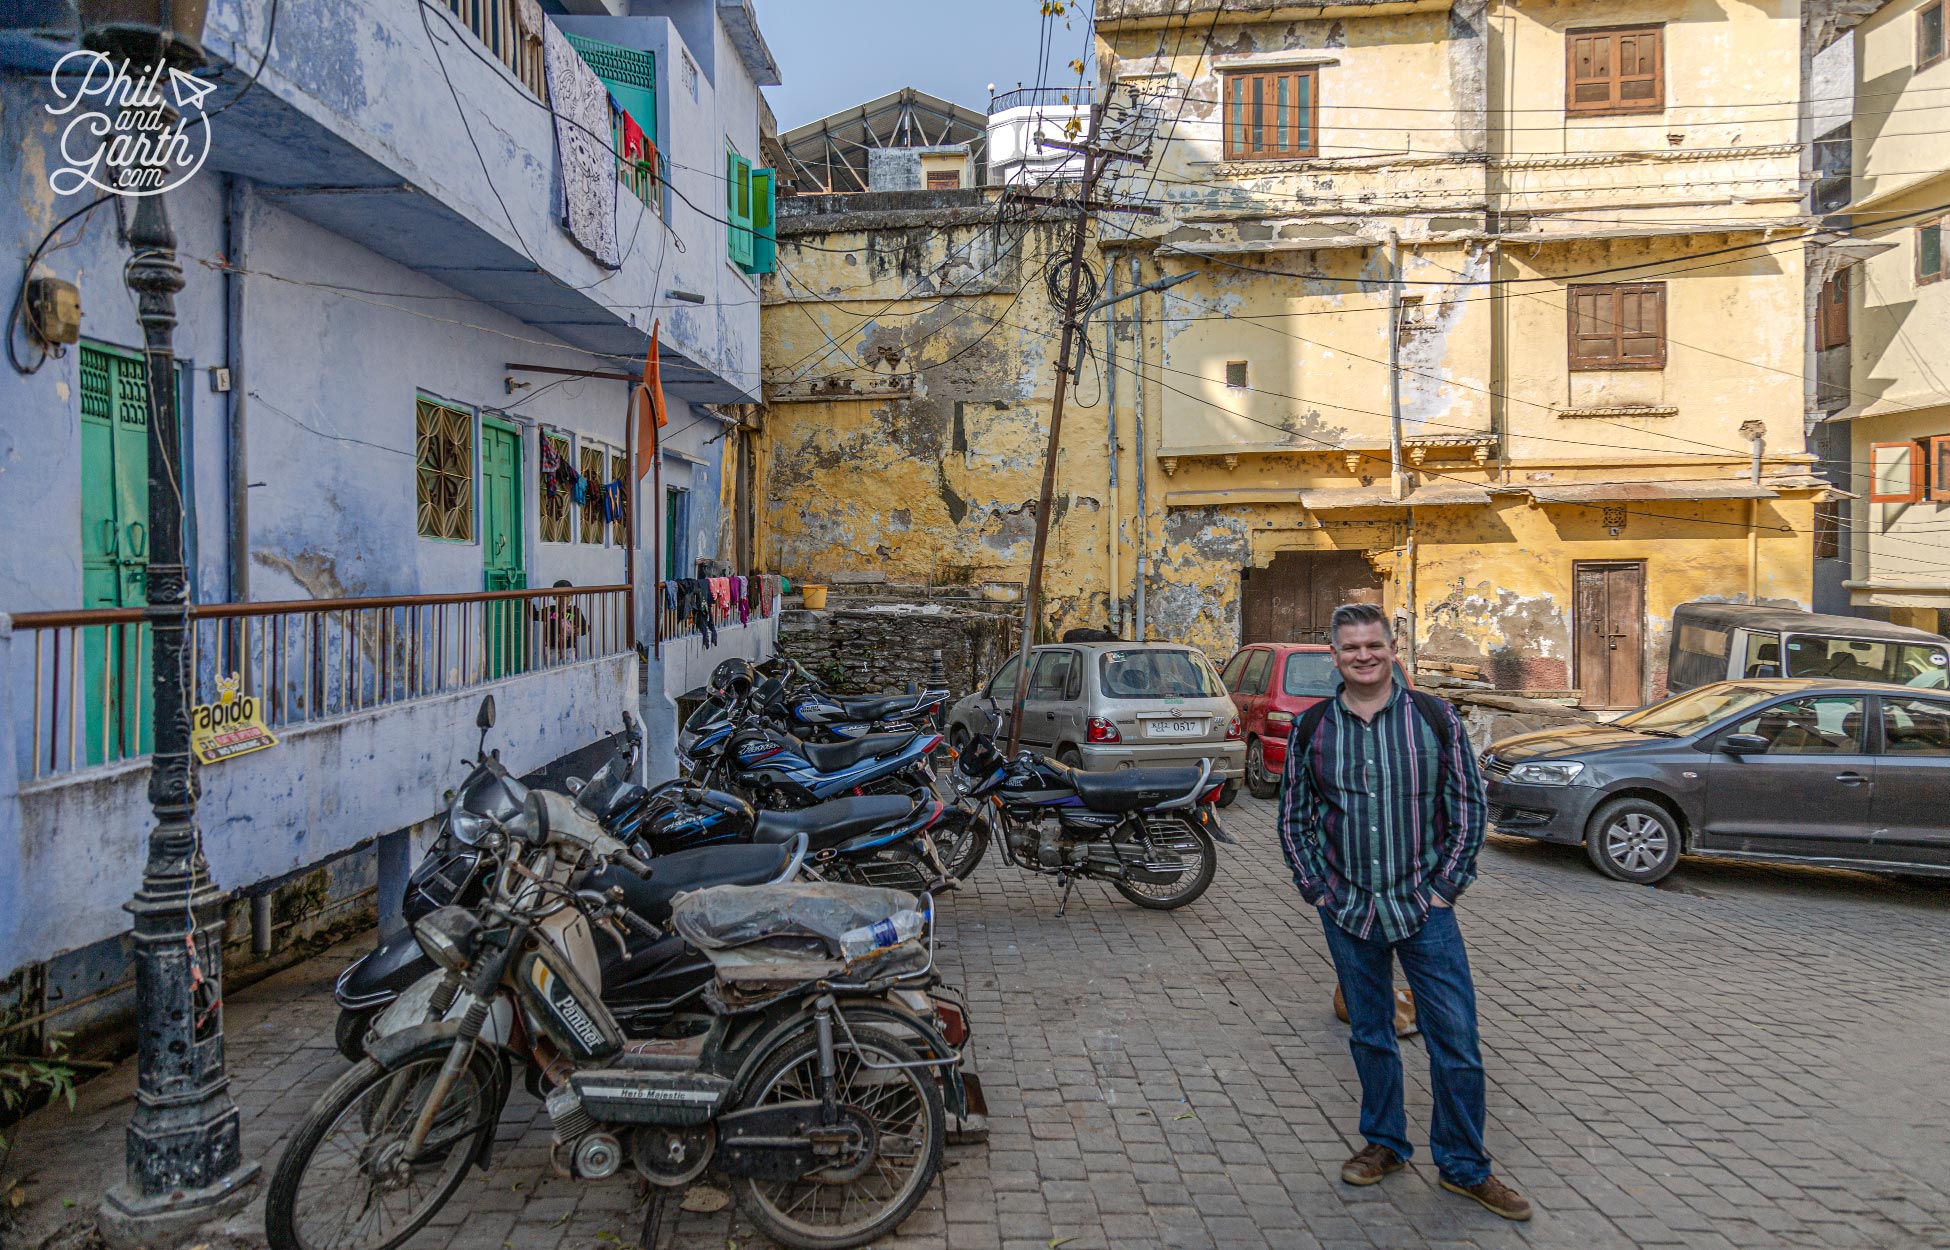 Wandering around the back streets of Udaipur